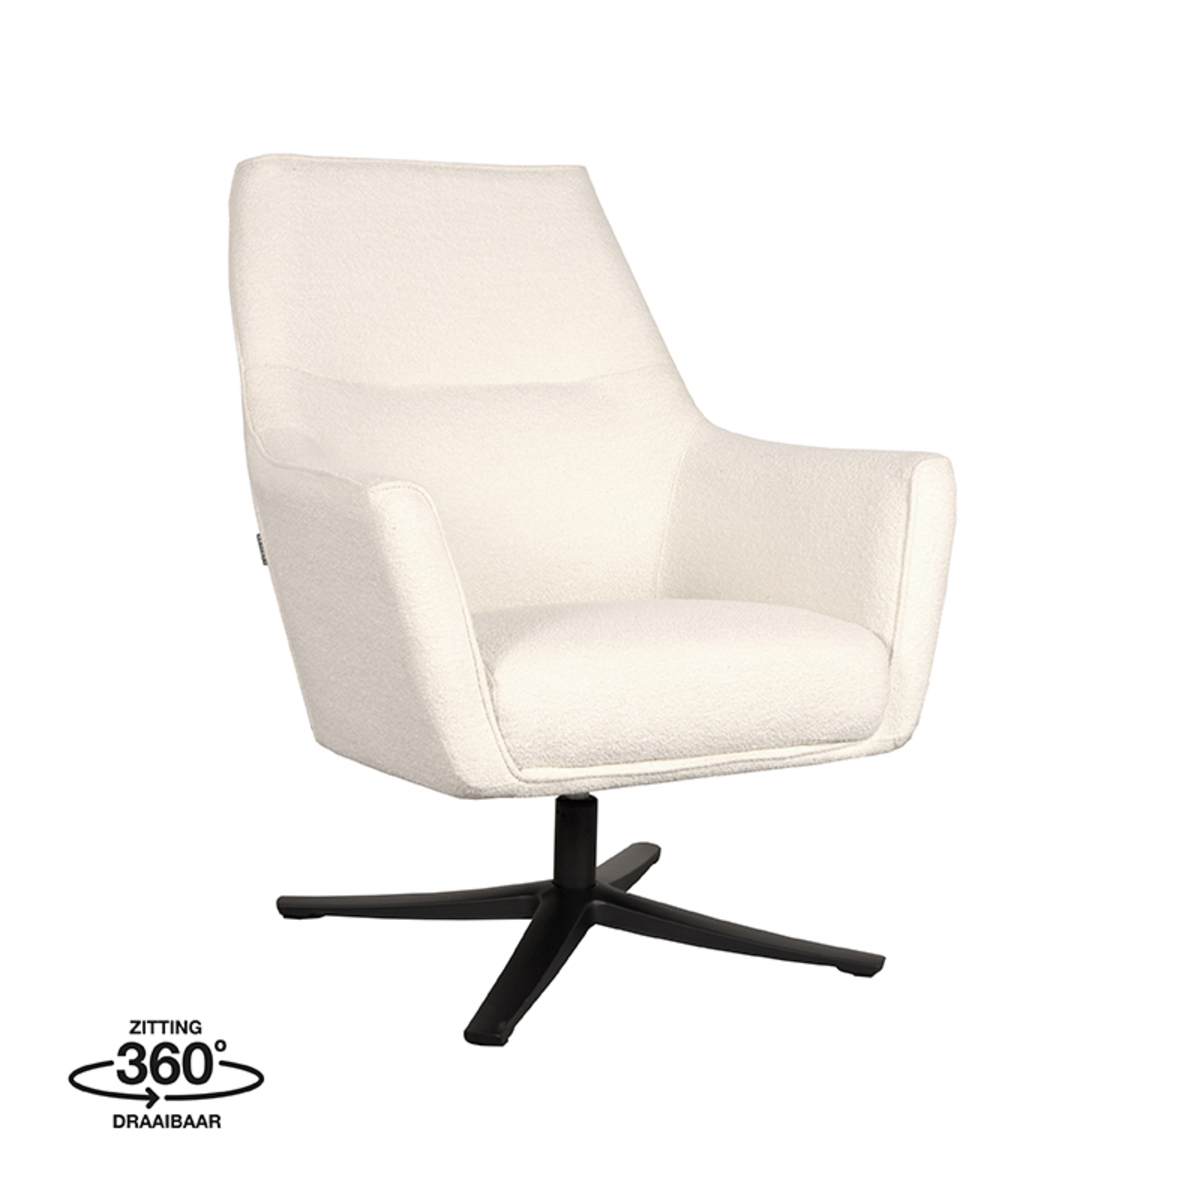 https://www.label51.nl/media/catalog/product/F/a/Fauteuil_Tod_Ivoor_Boucle_76x75x90_cm_Perspectief-360.jpg